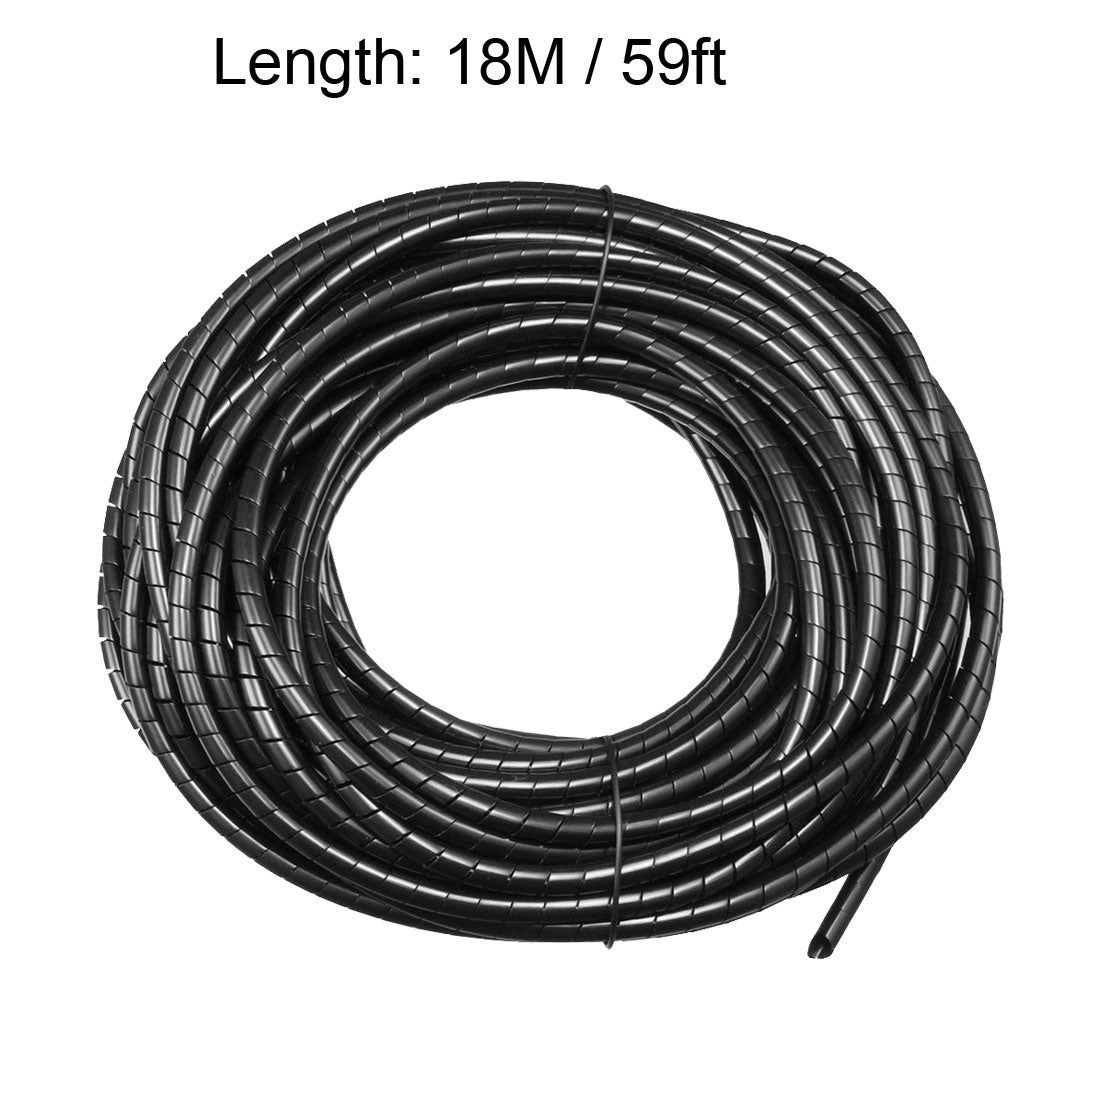 uxcell Uxcell 4mm Flexible Spiral Tube Cable Wire Wrap Manage Cord 18M Length Transparent